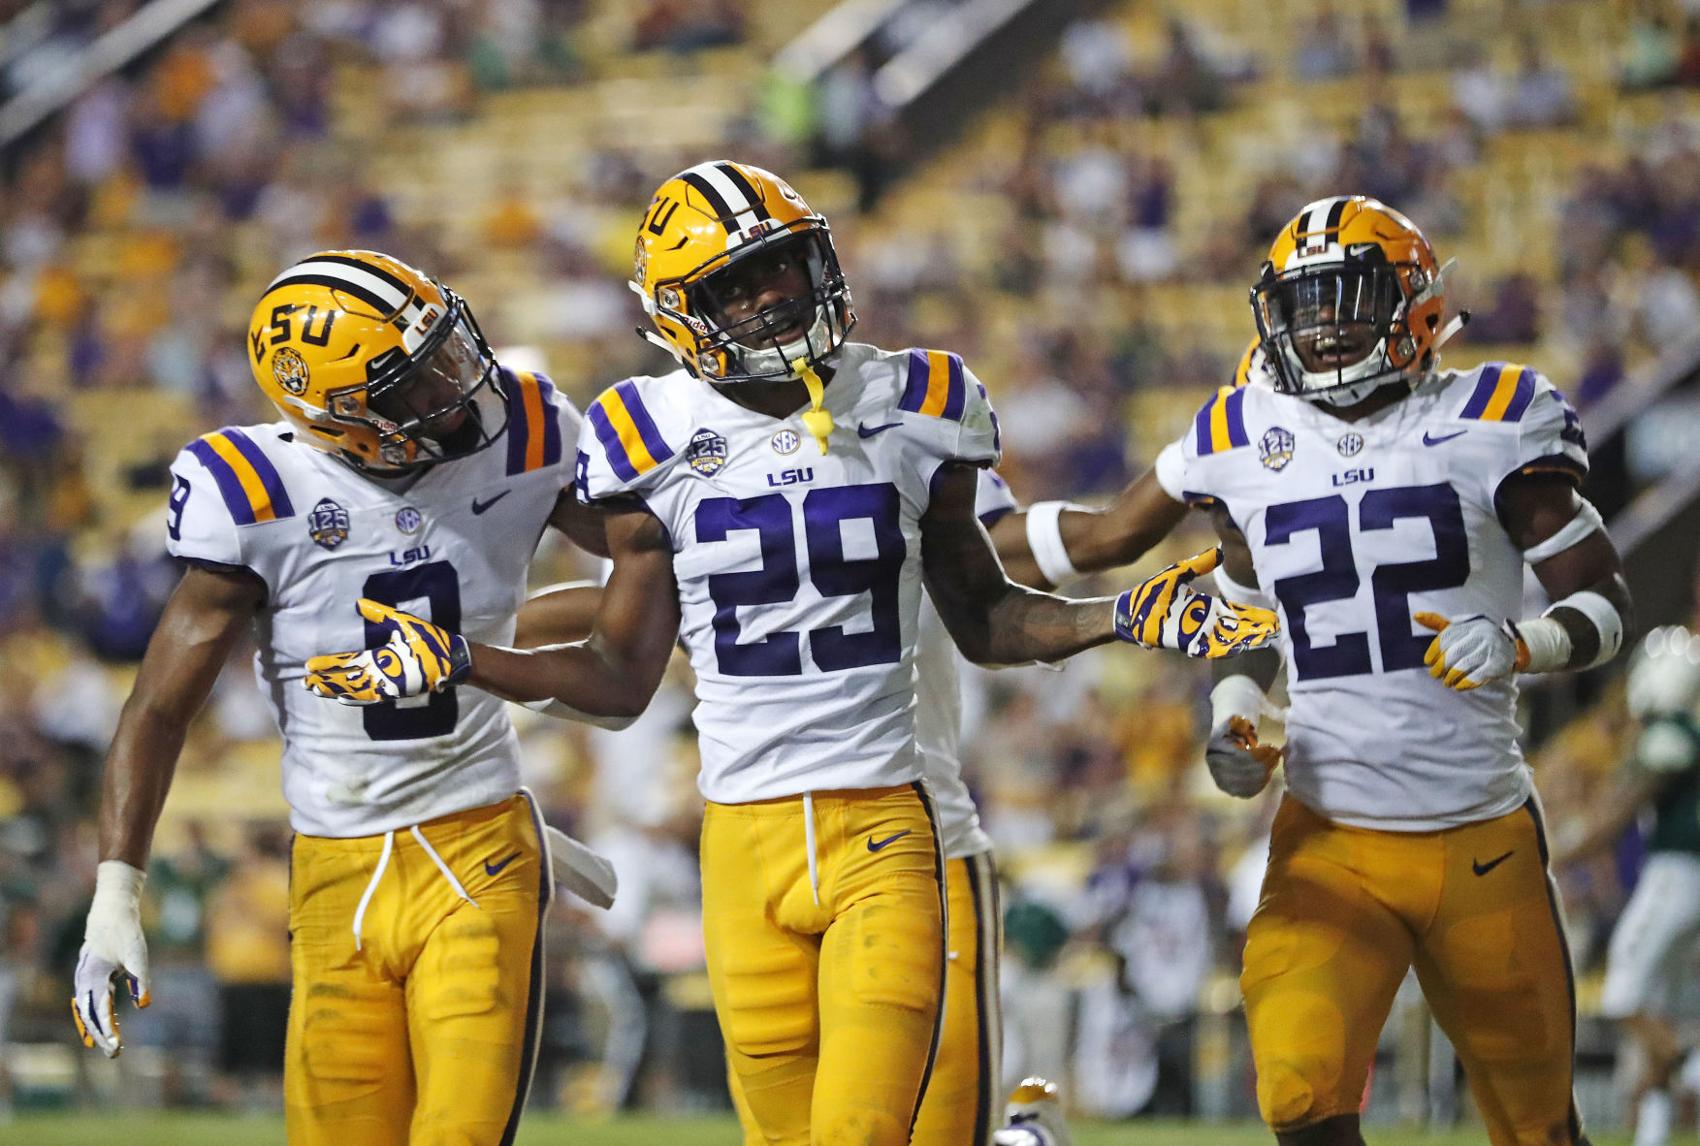 LSU’S WILLIAMS AND DELPIT NAMED TO FOOTBALL WRITERS ALL-AMERICA FIRST TEAM